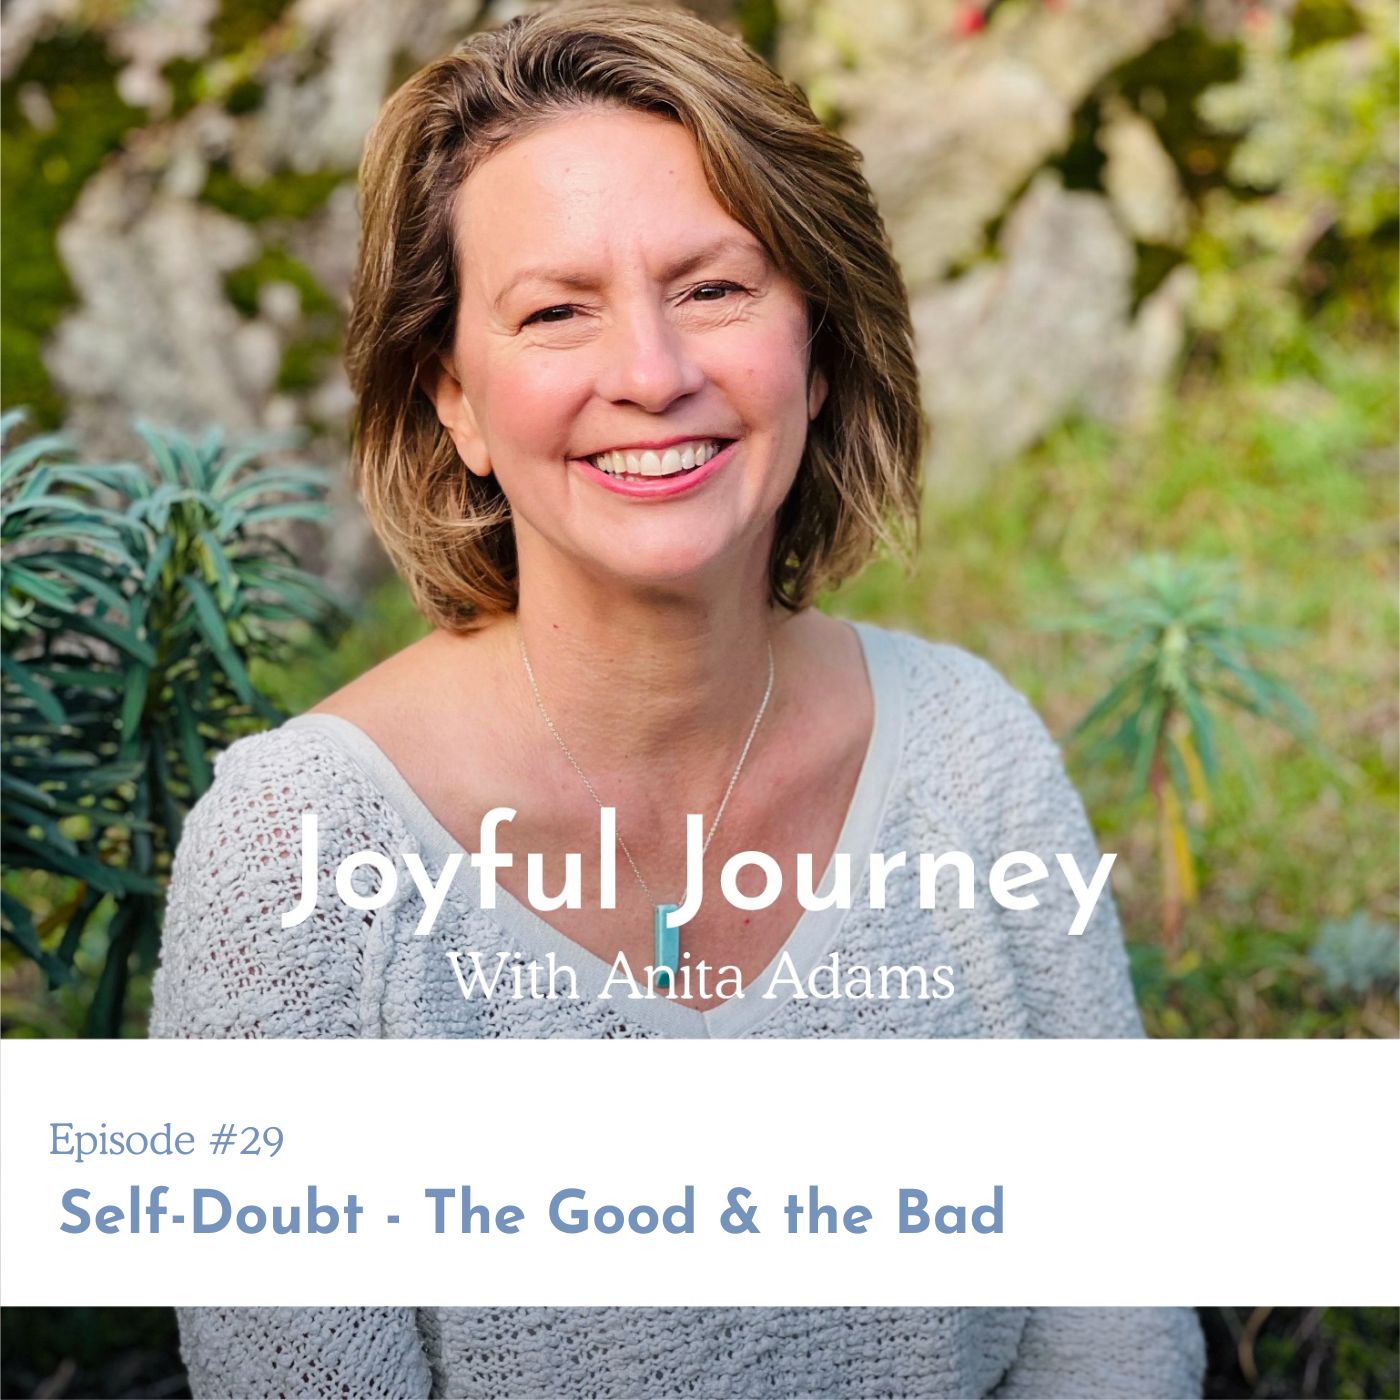 Self-Doubt - The Good & the Bad